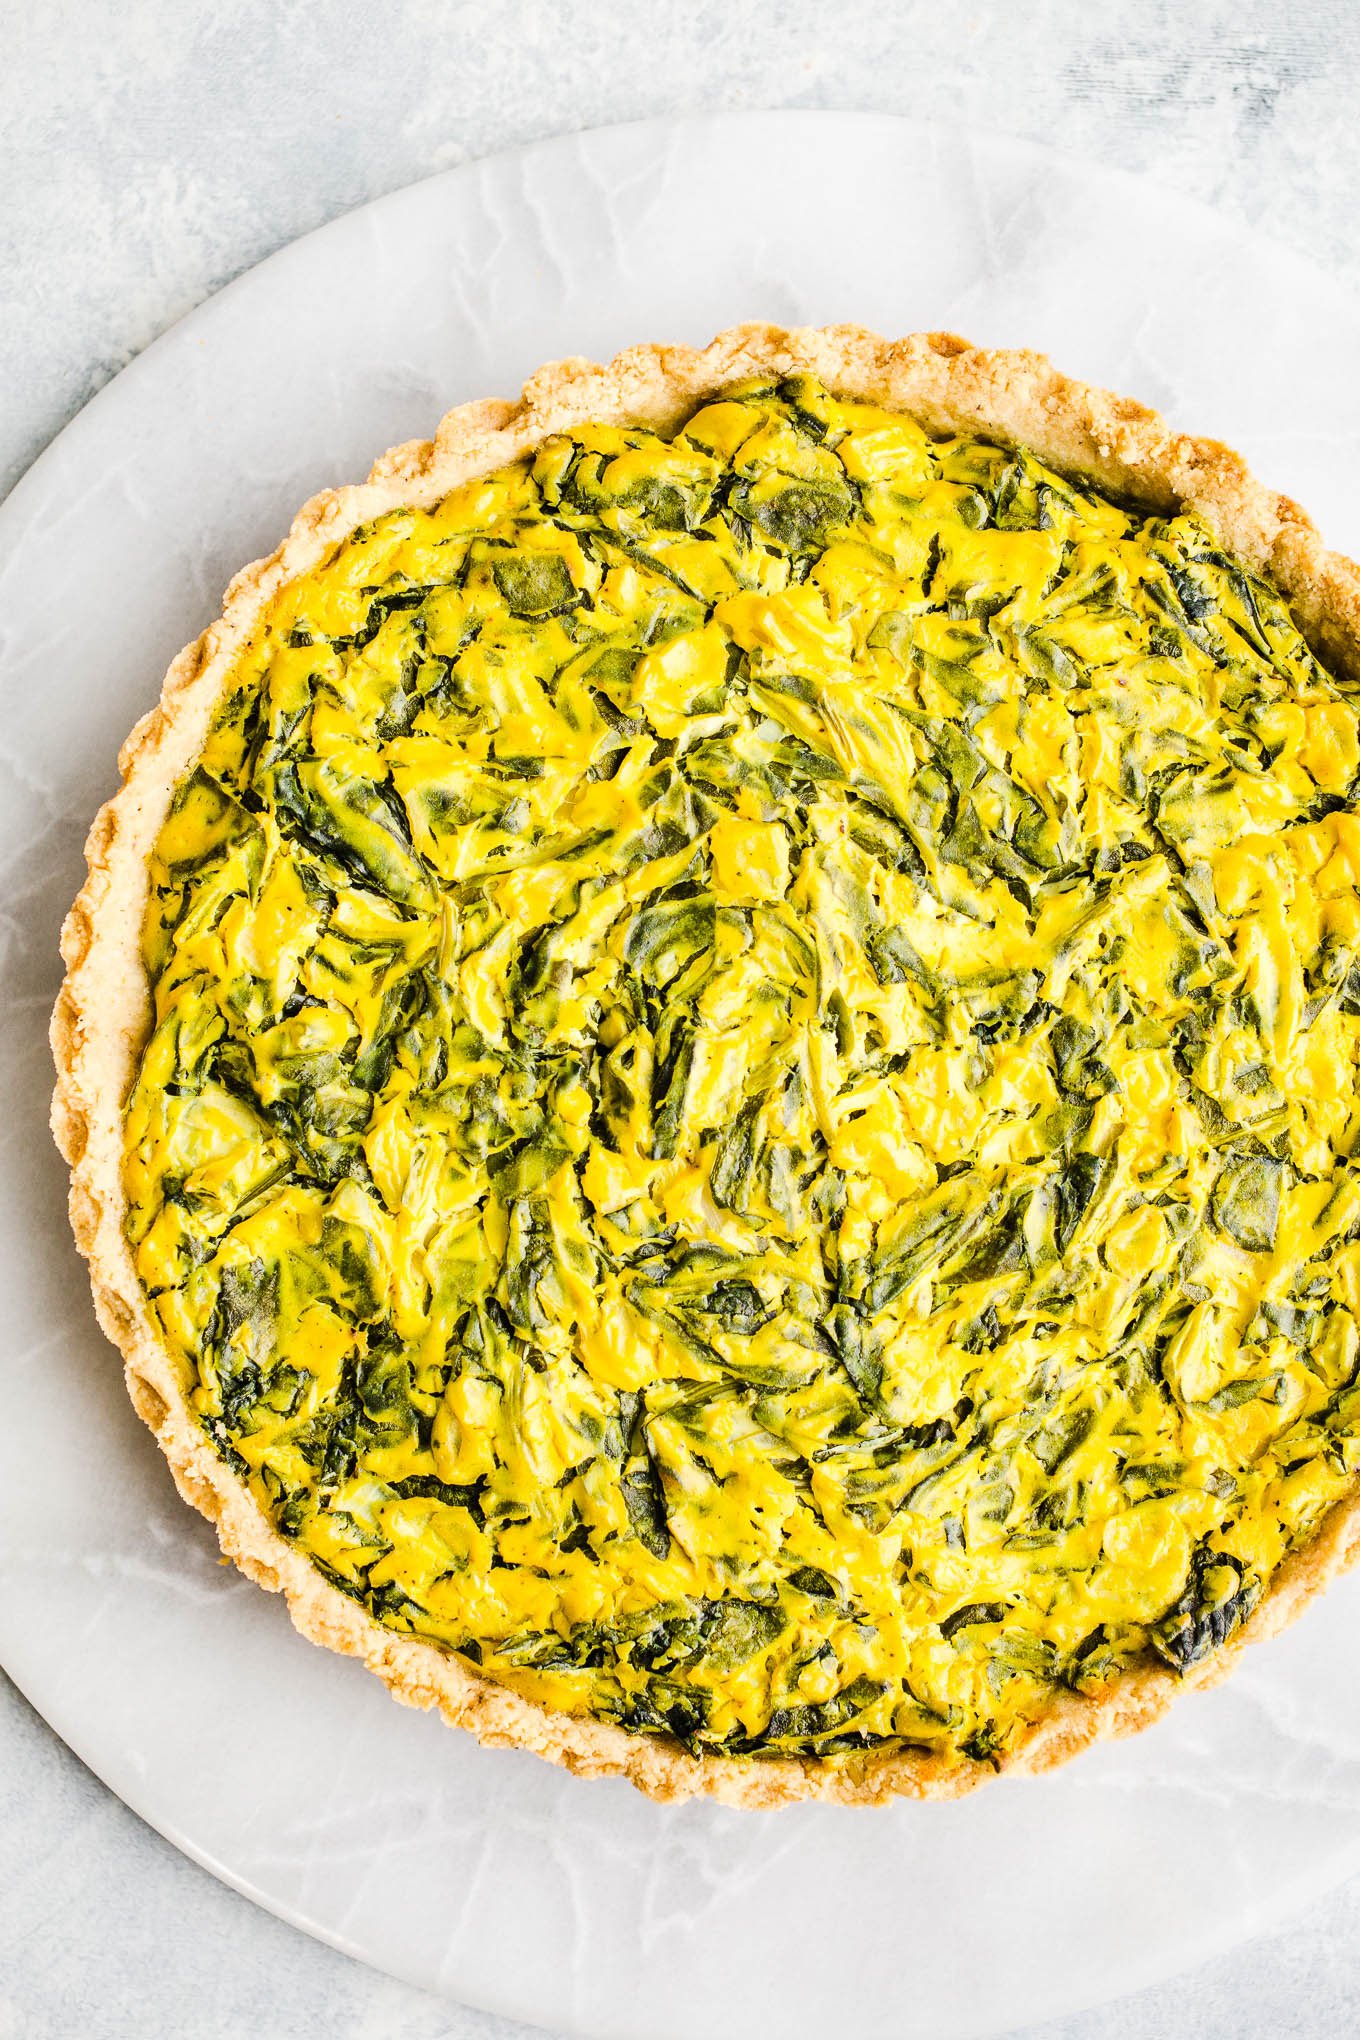 A round large yellow quiche with crust full of wilted spinach leaves.